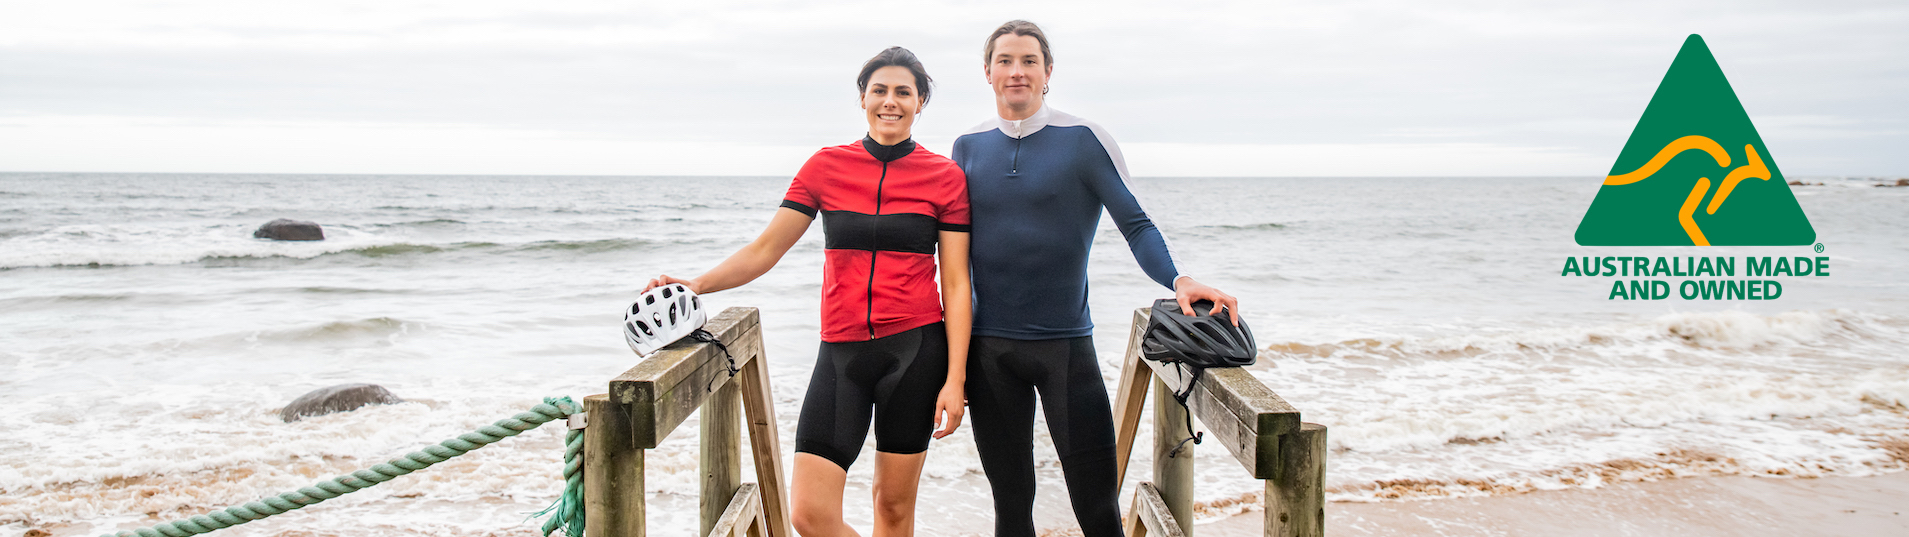 Long sleeve 100% Wool Sidling winter jersey full length zip front view male and female model standing with ocean in background